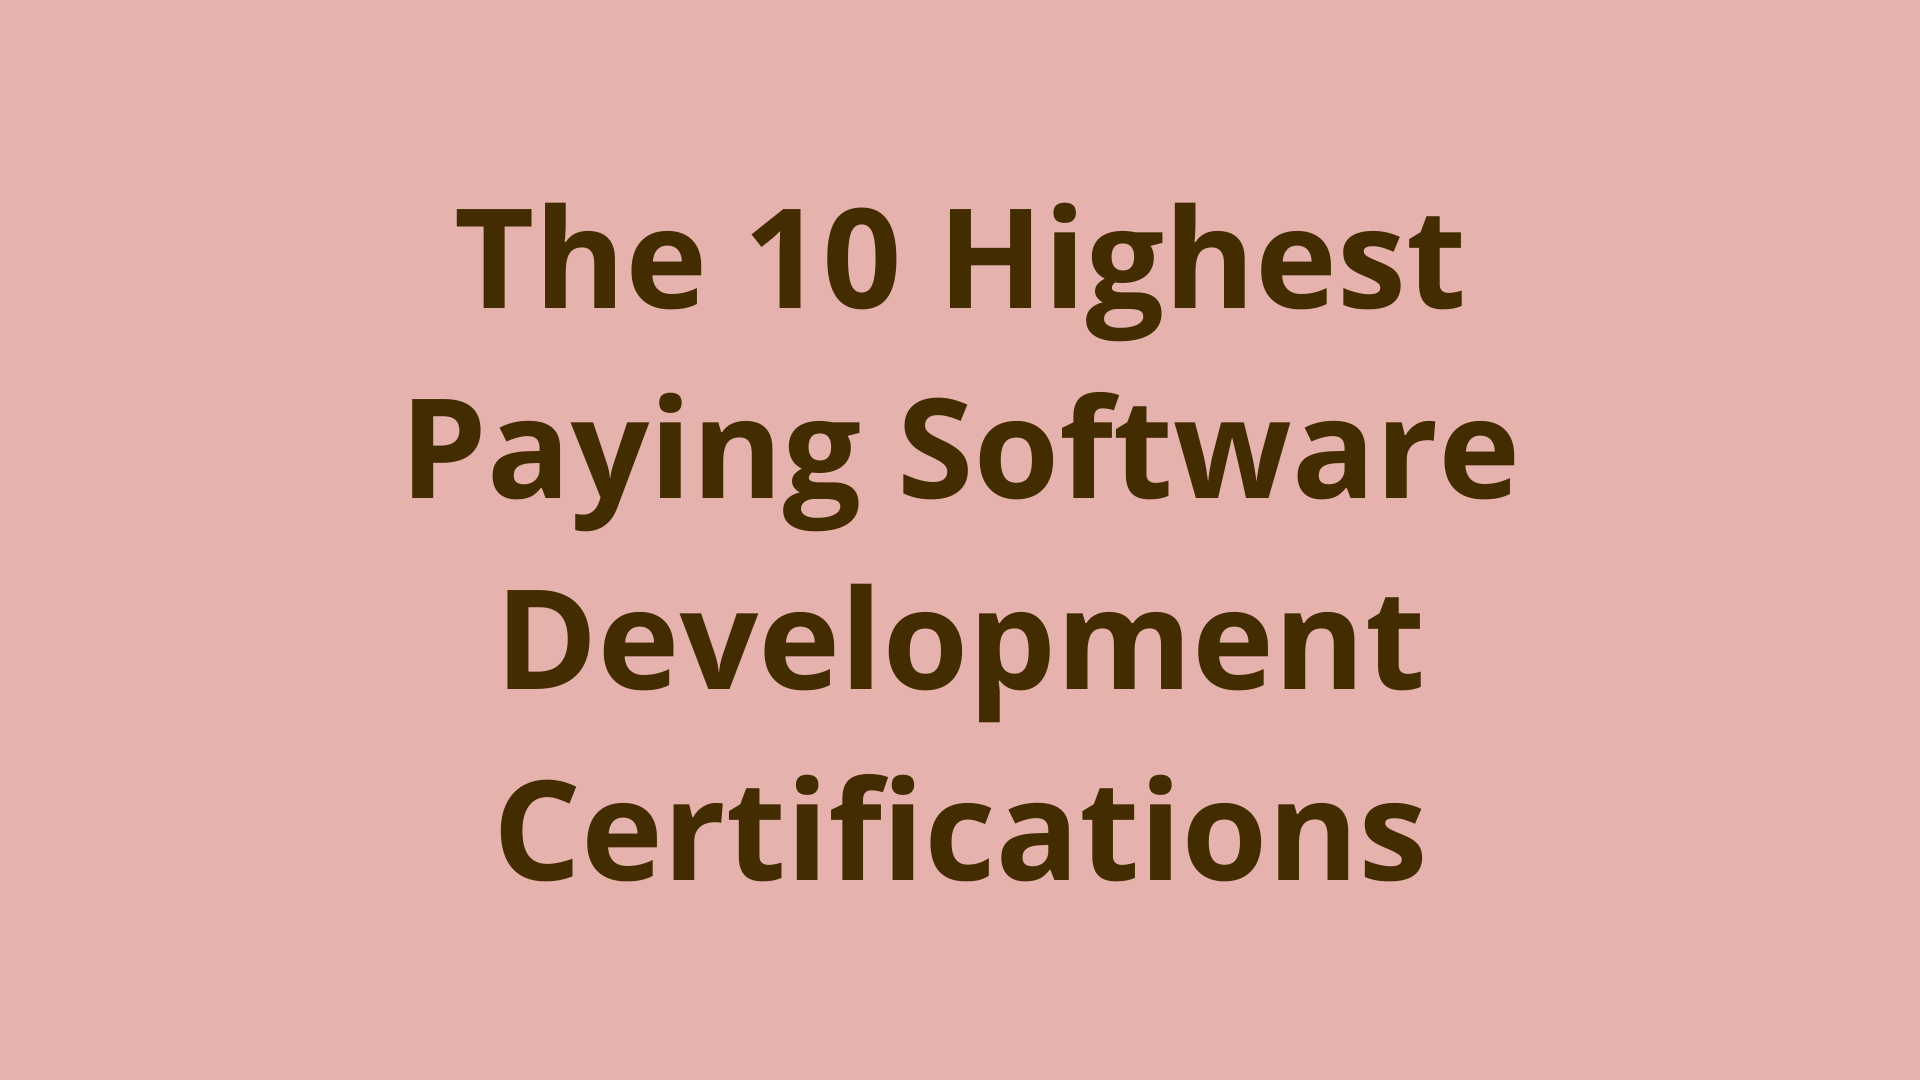 Image of The 10 highest paying software development certifications